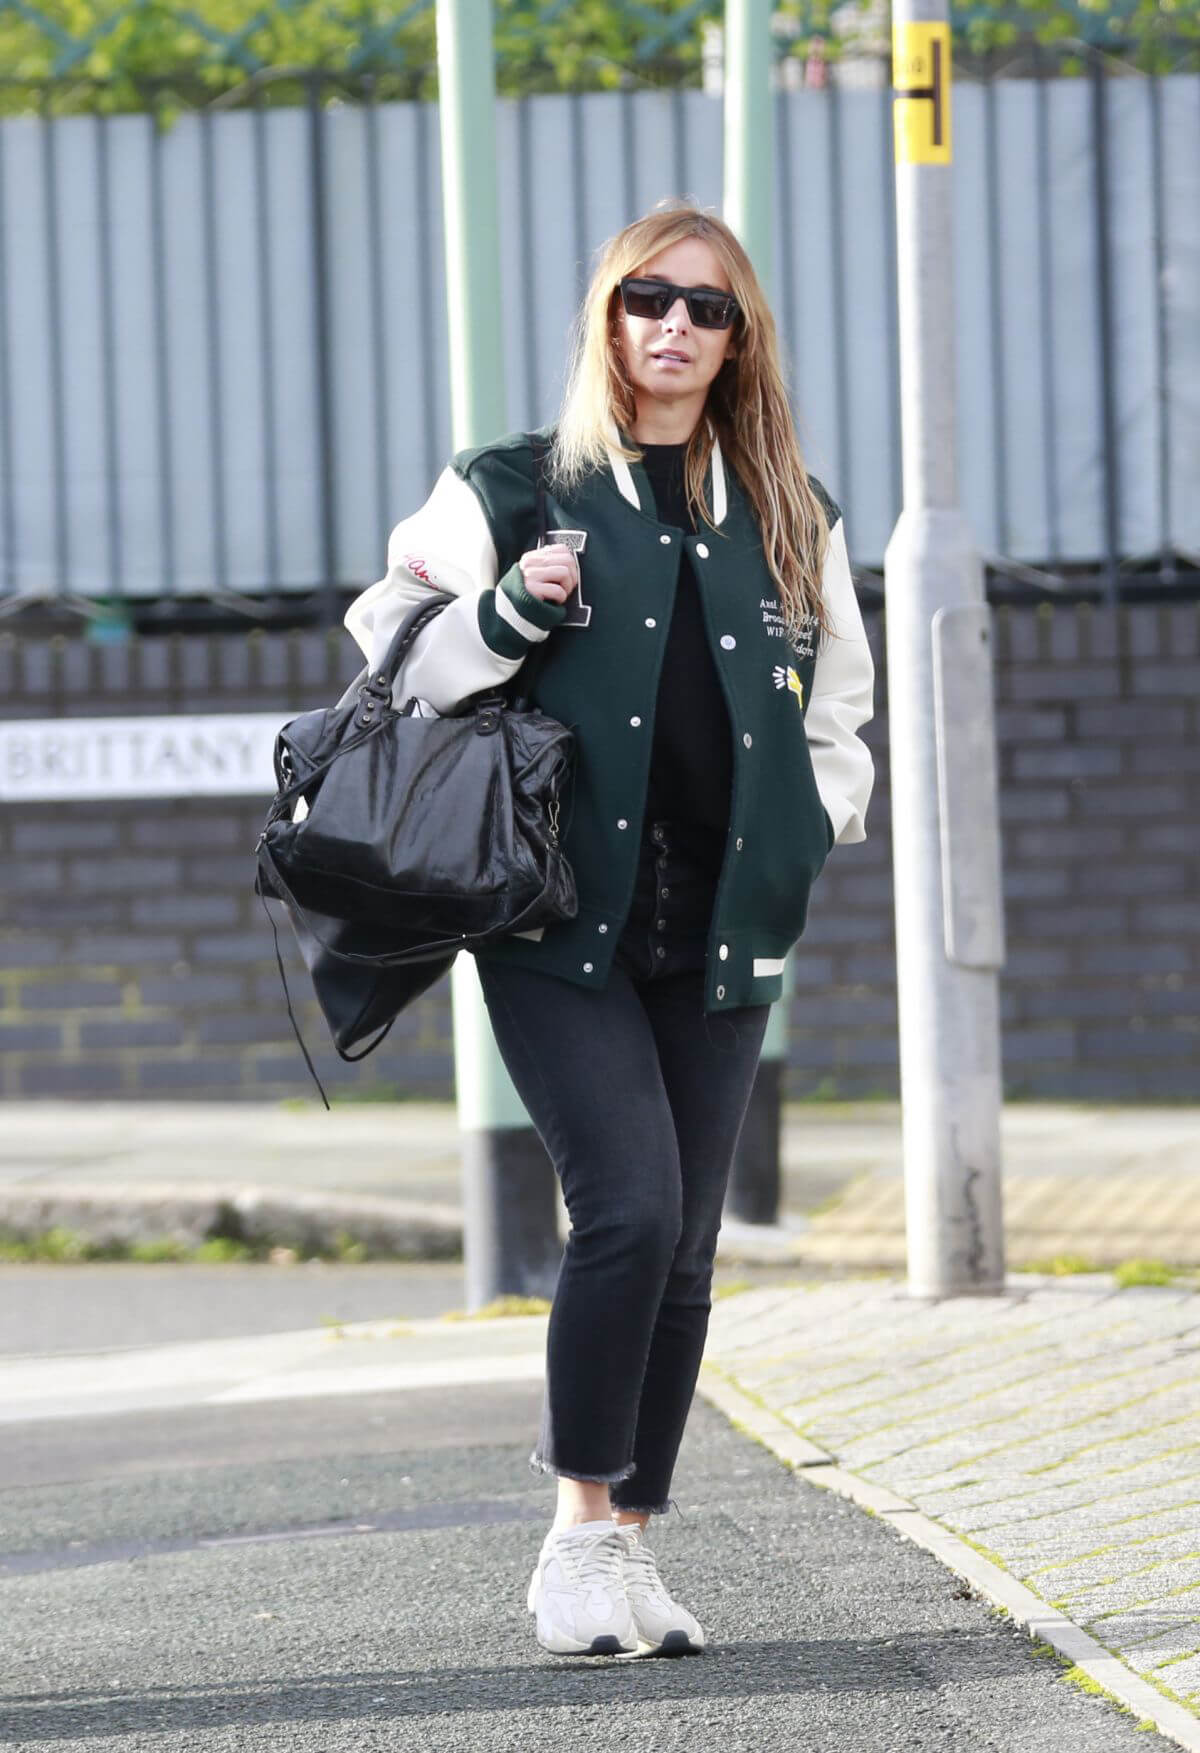 Louise Redknapp in Green White Jacket and Black Denim Day Out and About in Plymouth 3